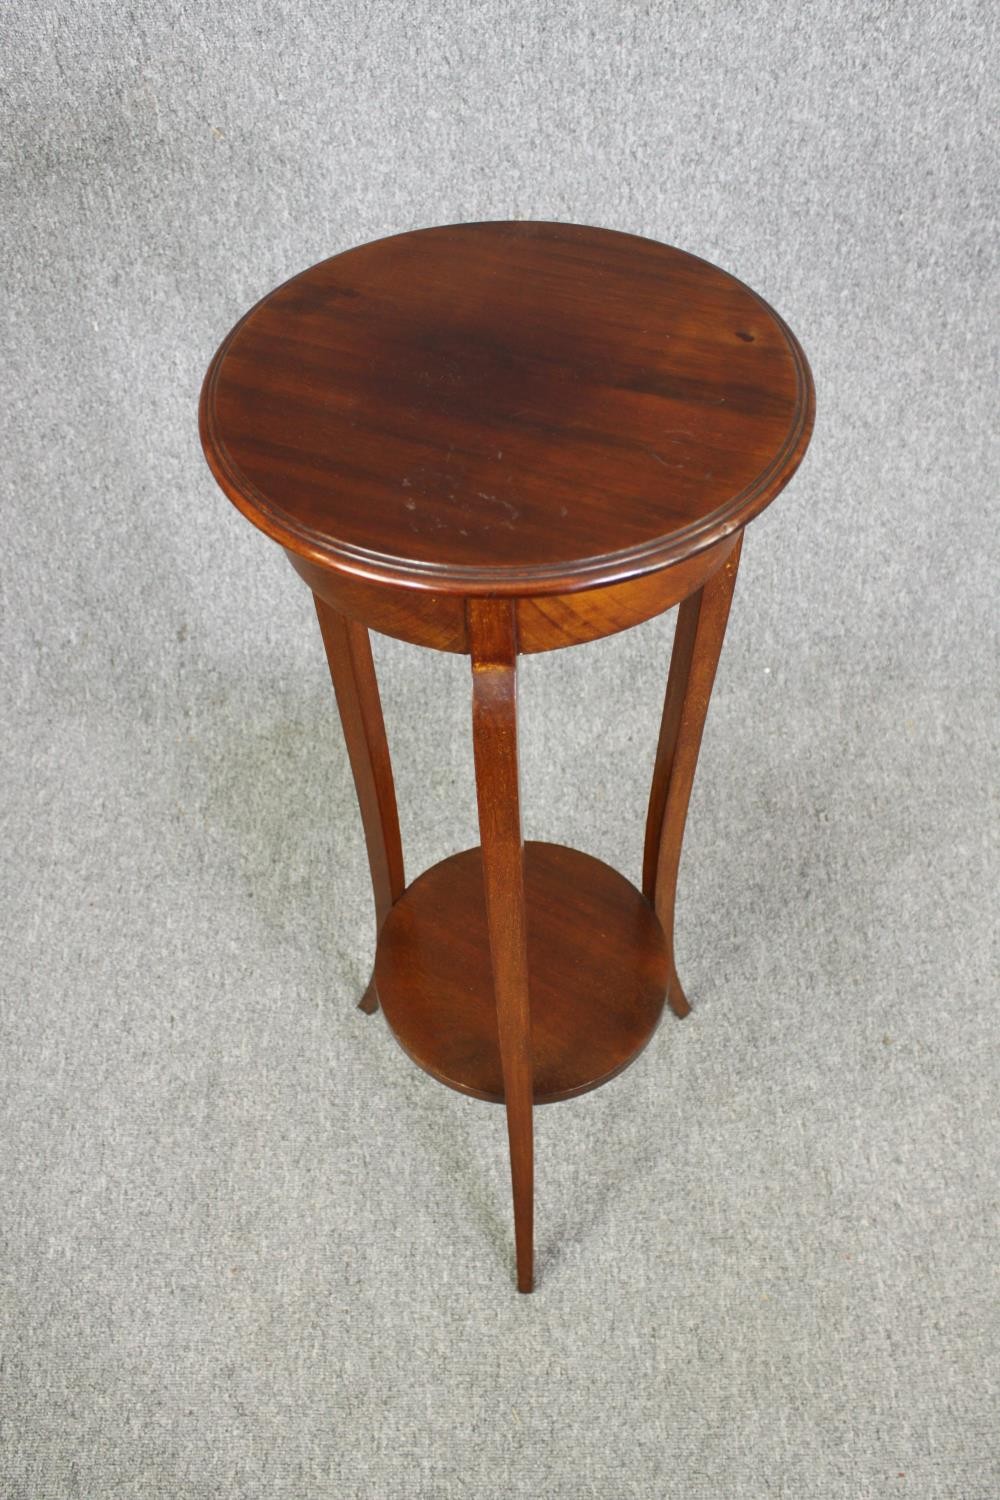 Jardiniere stand, late 19th century mahogany. H.95cm. - Image 2 of 4